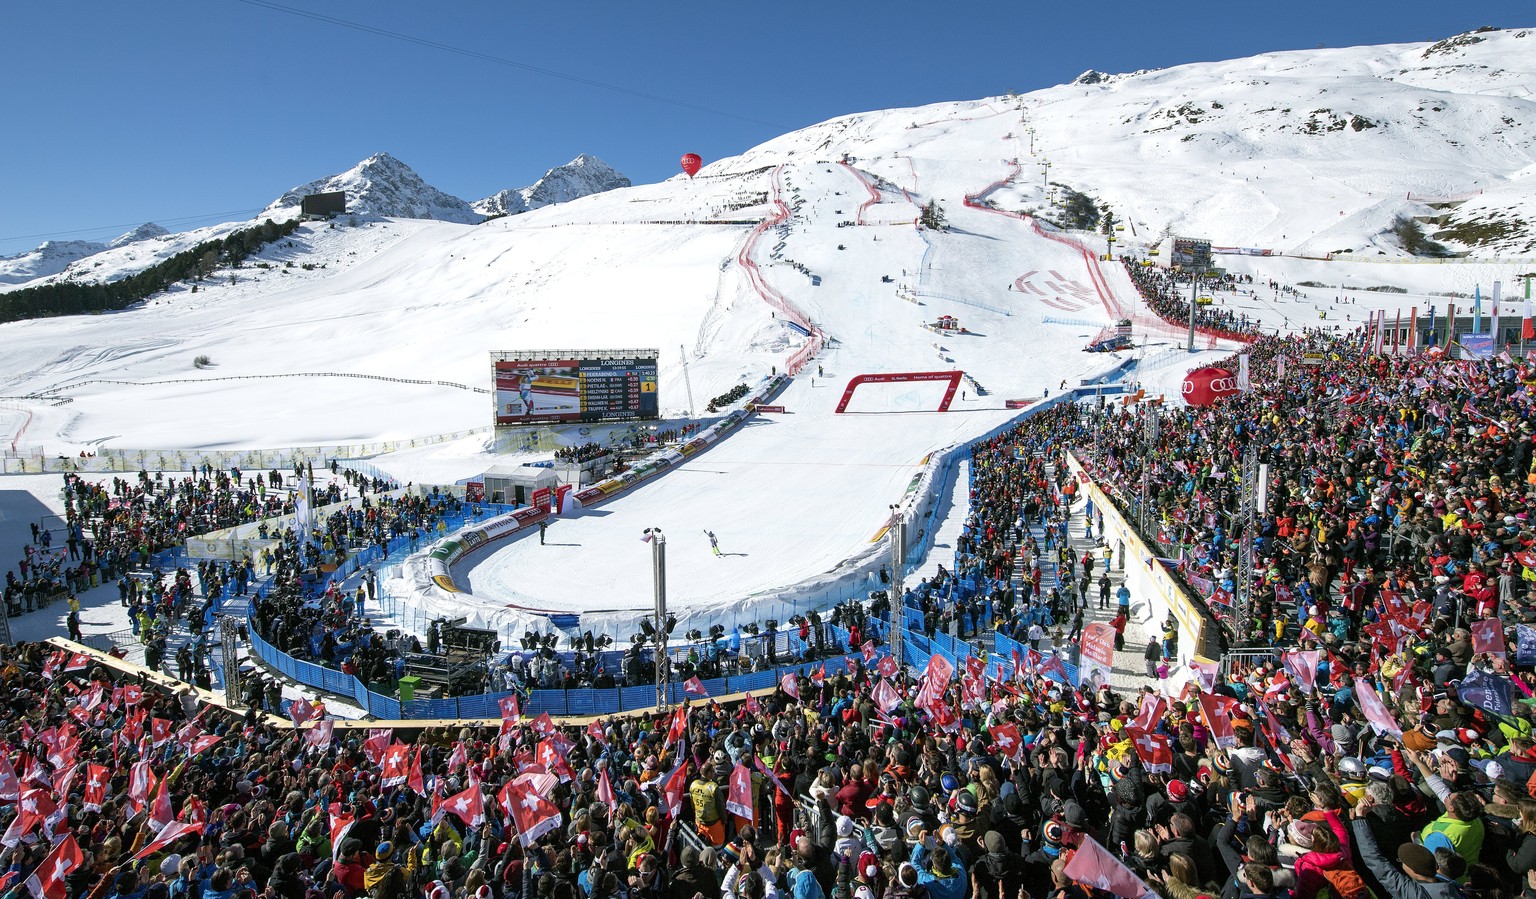 epa05801516 General view on the slope and finish area, during the second run of the women Slalom at the 2017 FIS Alpine Skiing World Championships in St. Moritz, Switzerland, Saturday, February 18, 20 ...